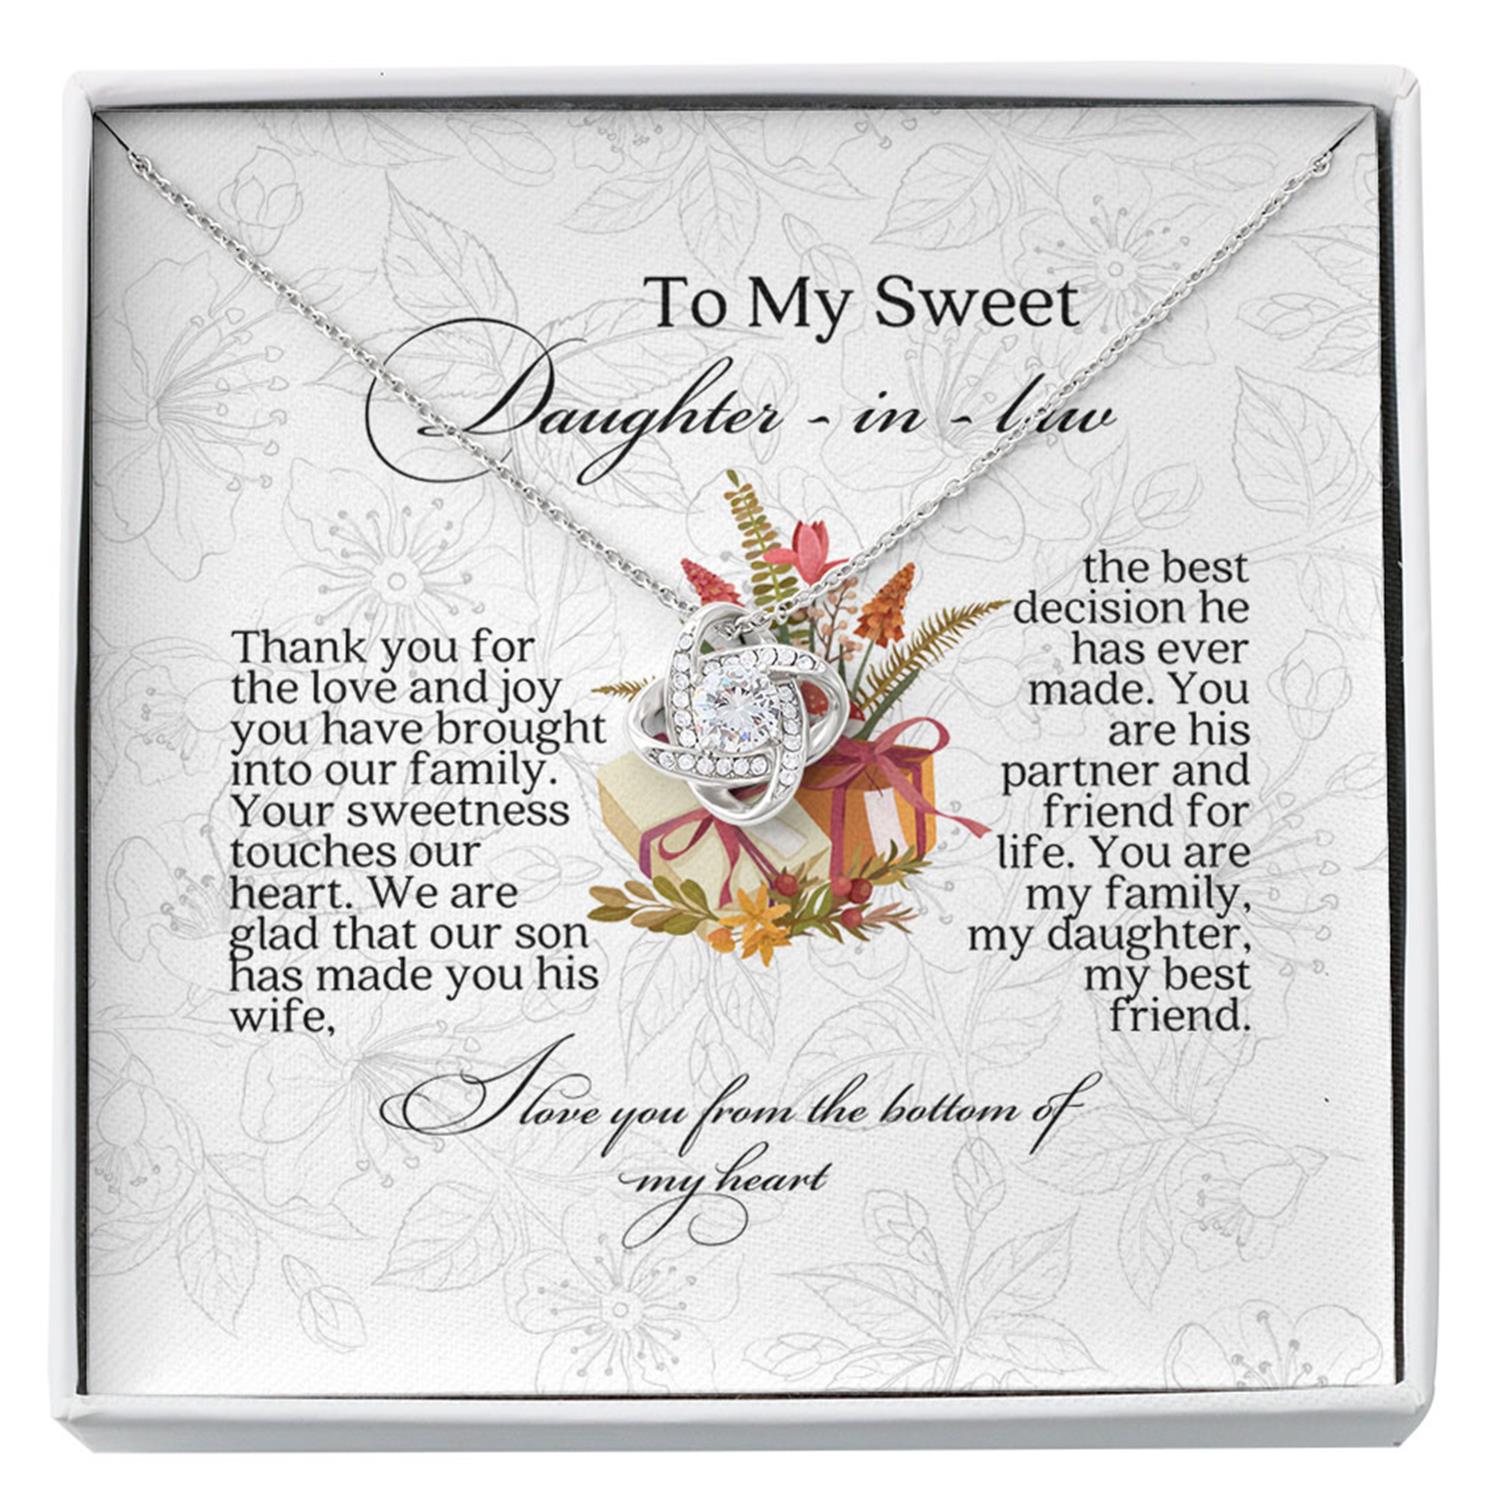 Daughter-in-law Necklace, My Sweet Daughter-in-Law Necklace Mother's Gifts, Mom Message Card Custom Necklace